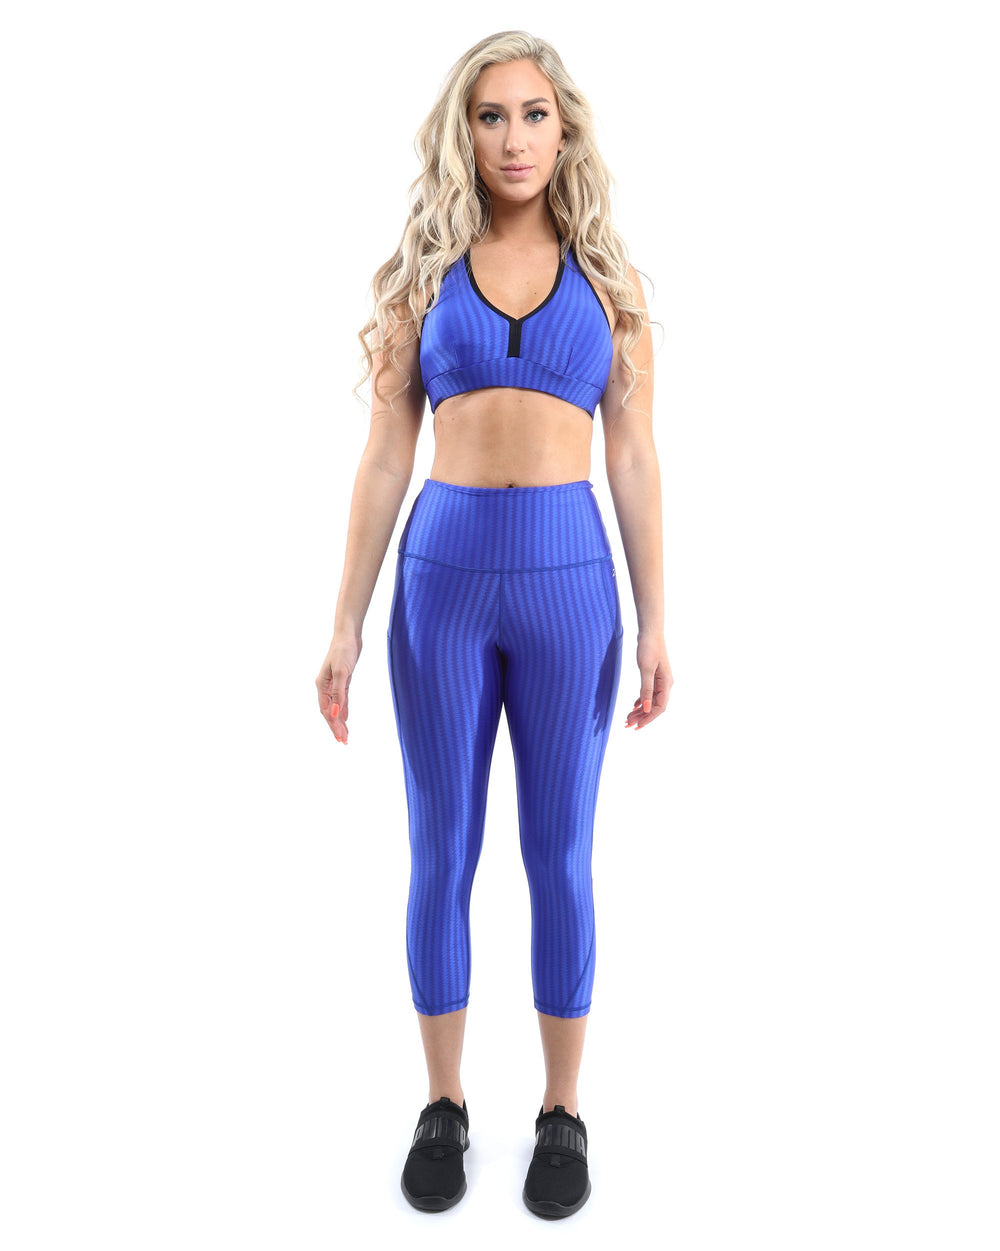 Firenze Activewear Sports Bra - Blue [MADE IN ITALY]